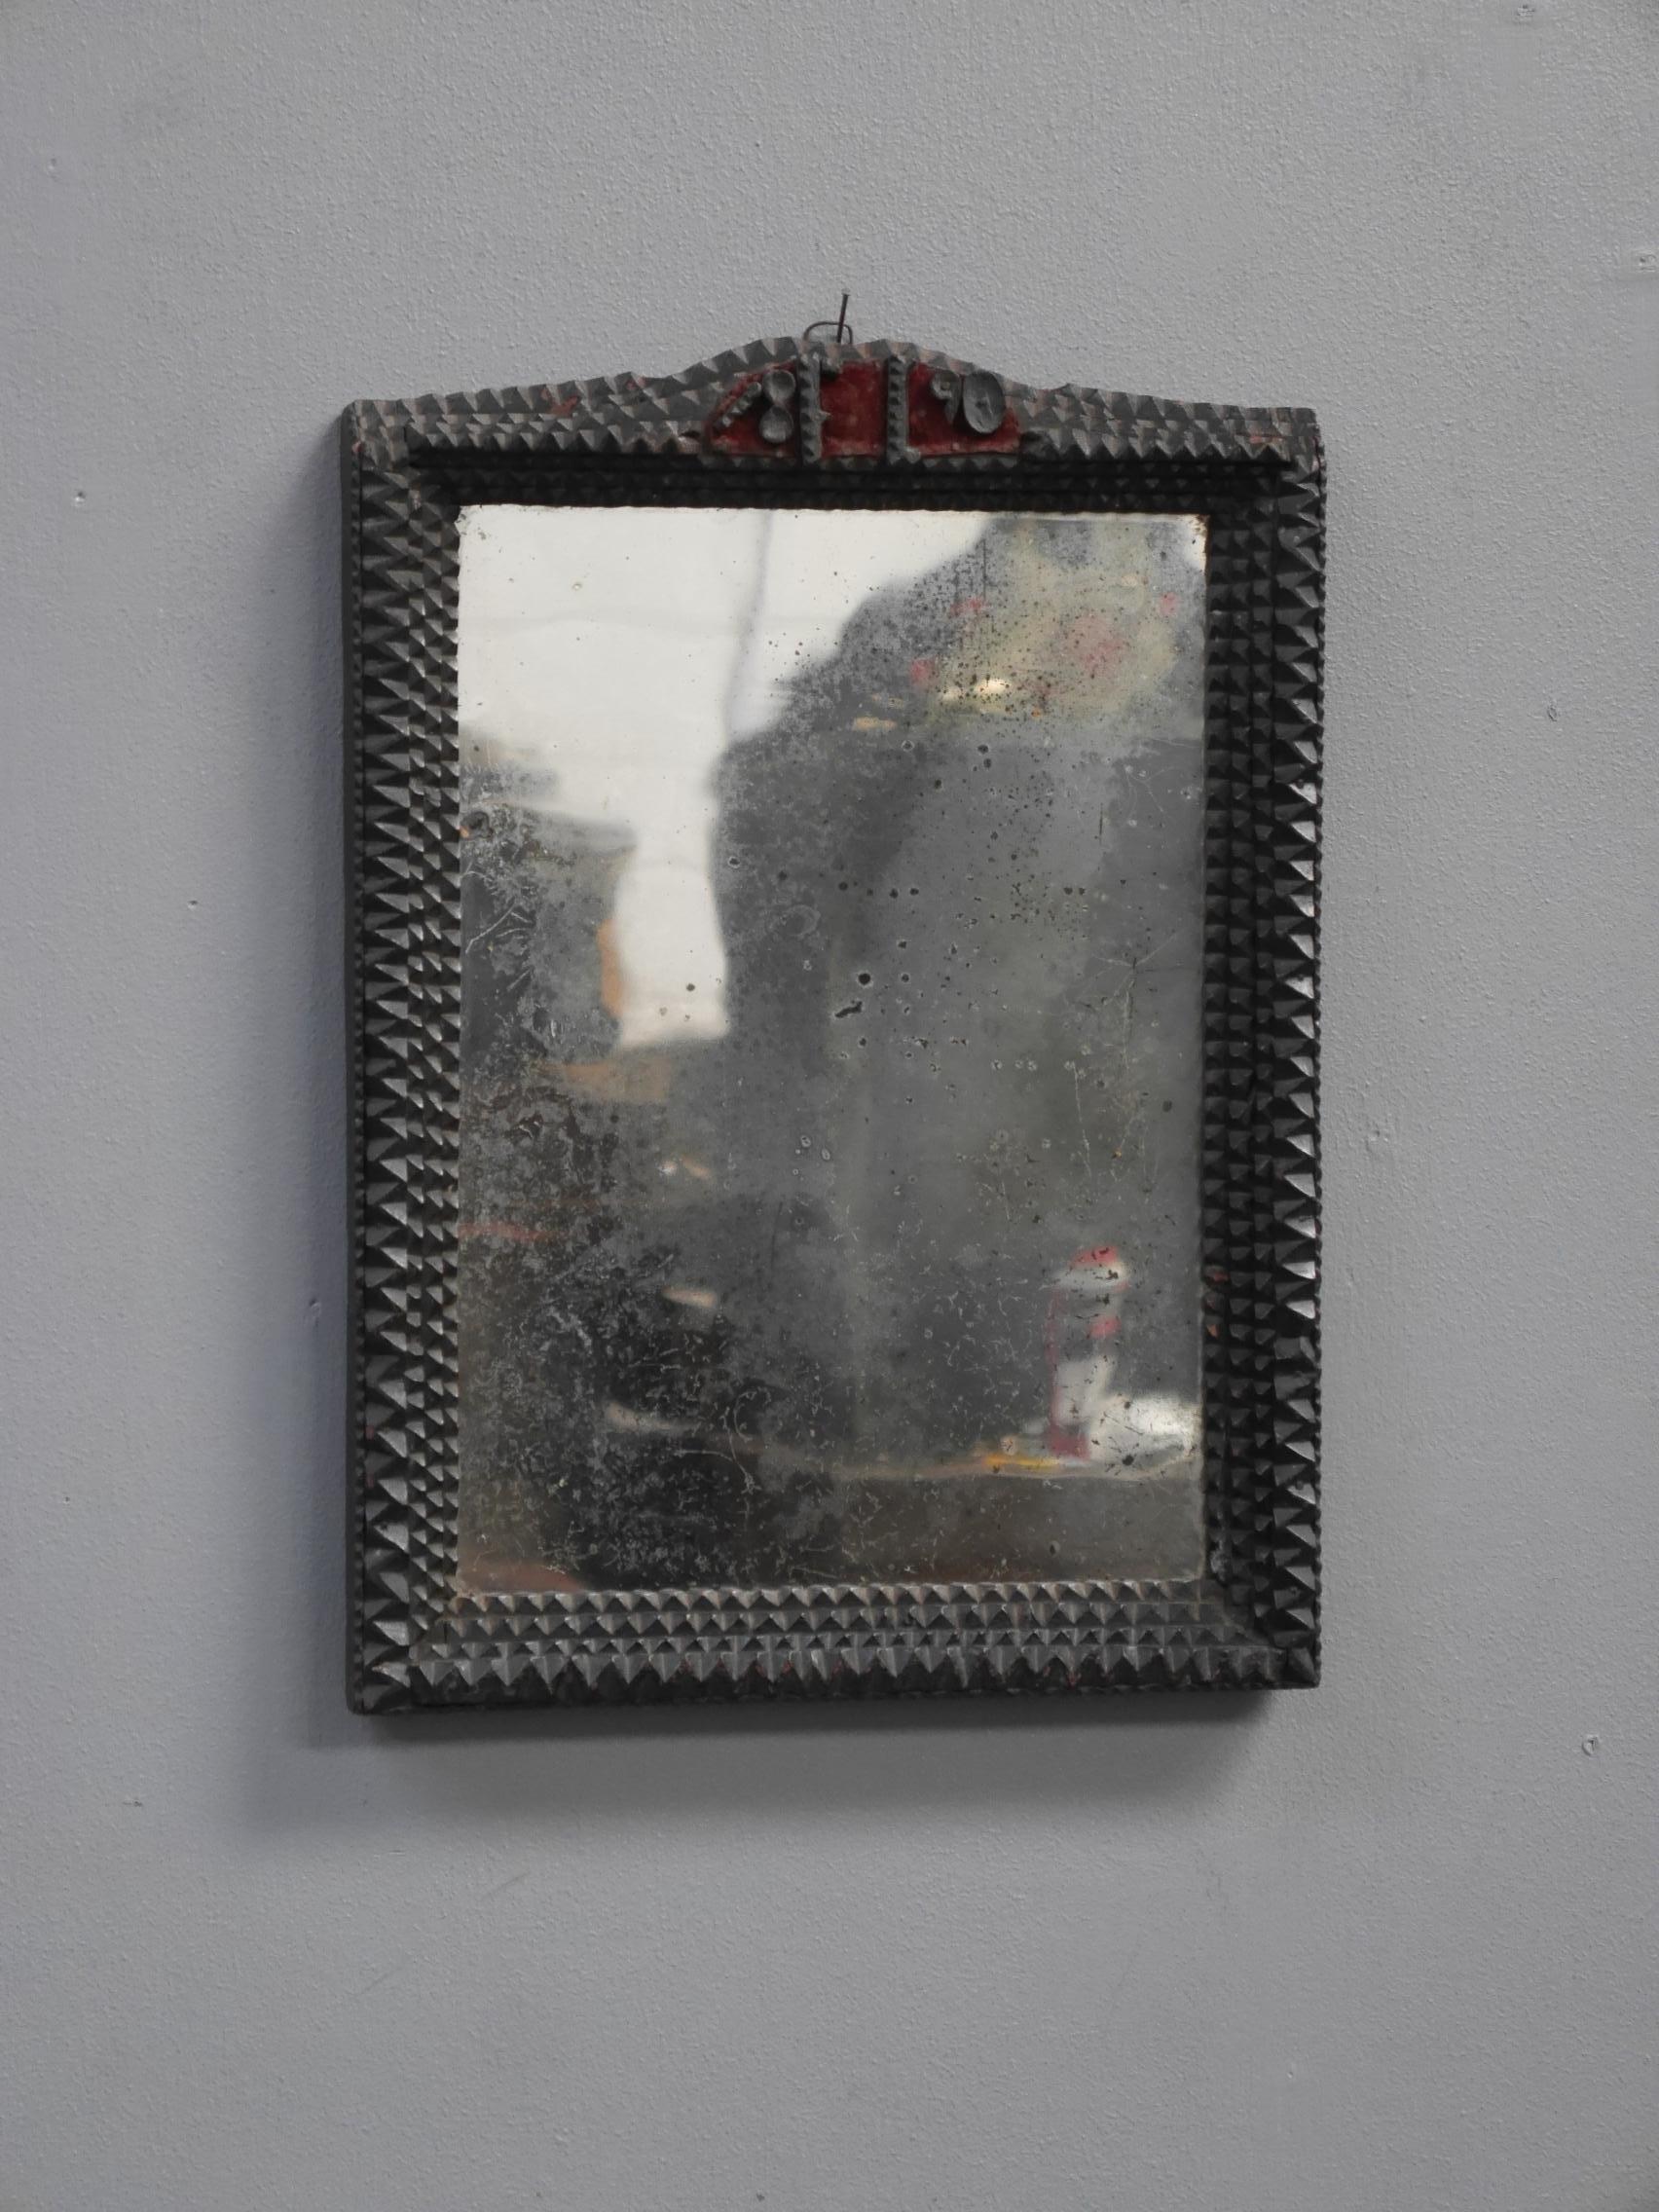 An early tramp art mirror.
A delightful piece of tramp art, the frame intricately layered & notch carved in the traditional manner, delightfully untouched, in the original finish & topped with a red velvet backed, dated panel. With a beautifully